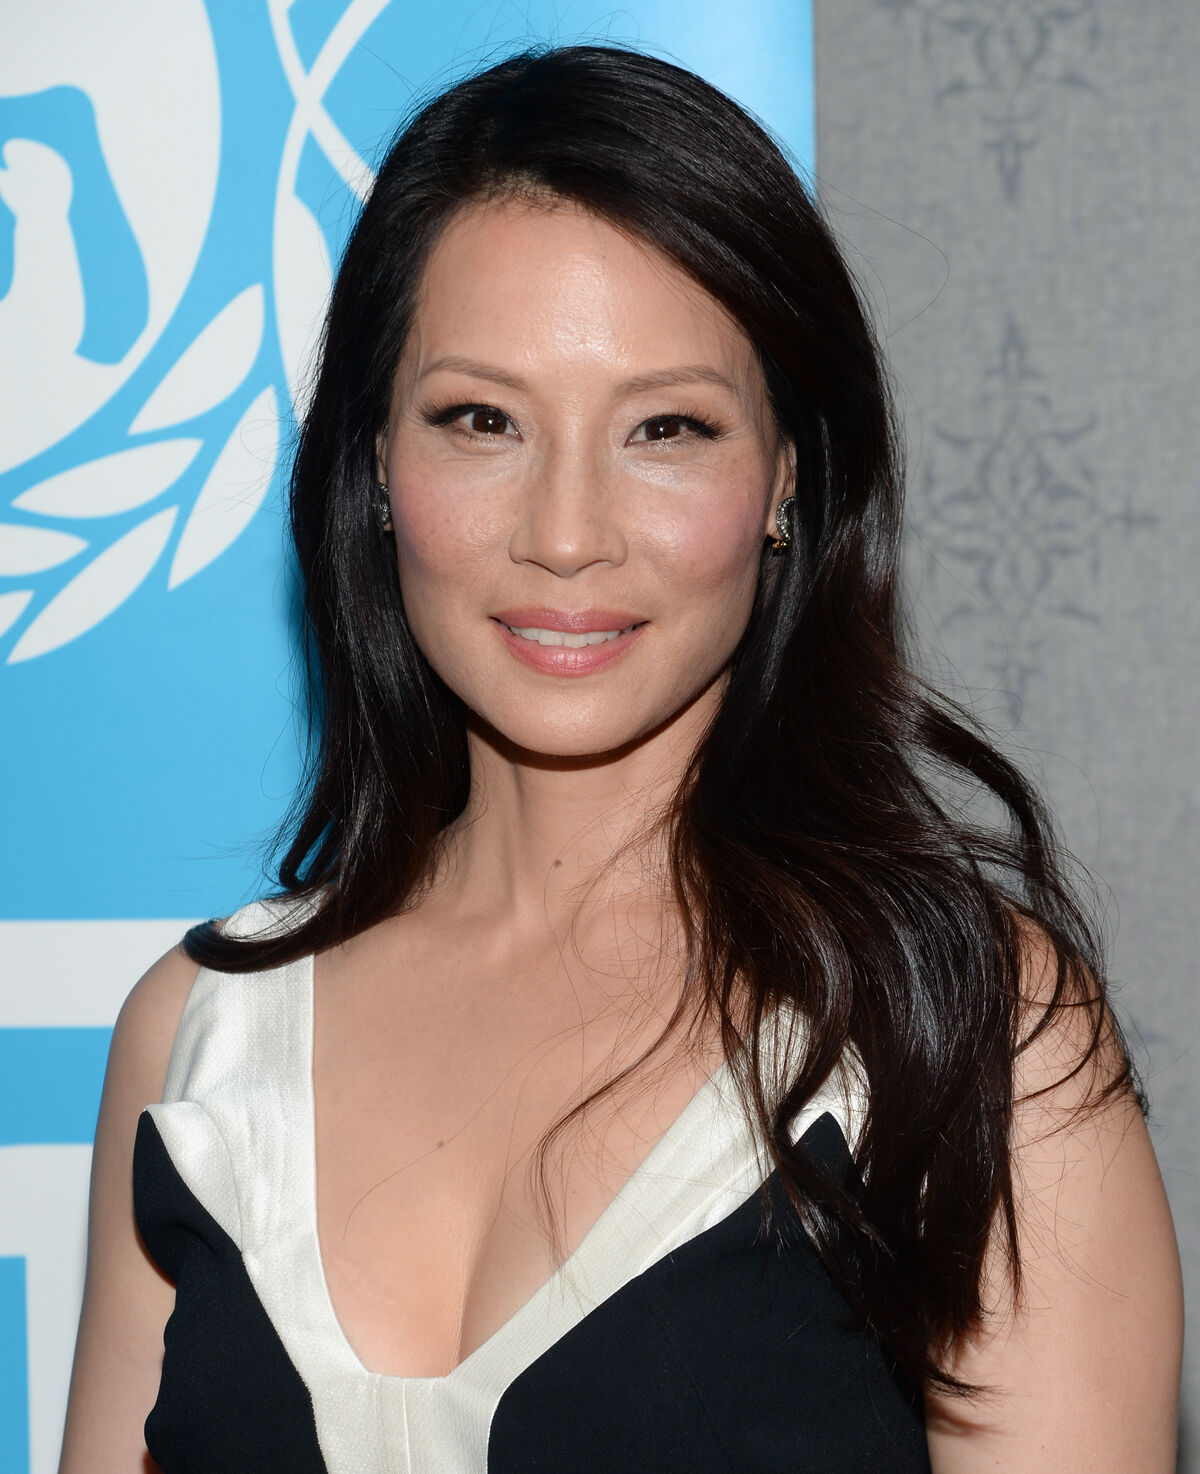 Lucy Liu Enlivens A Sexy New Nemesis For Spike's Afro Samurai Sequel -  Channel Guide Magazine